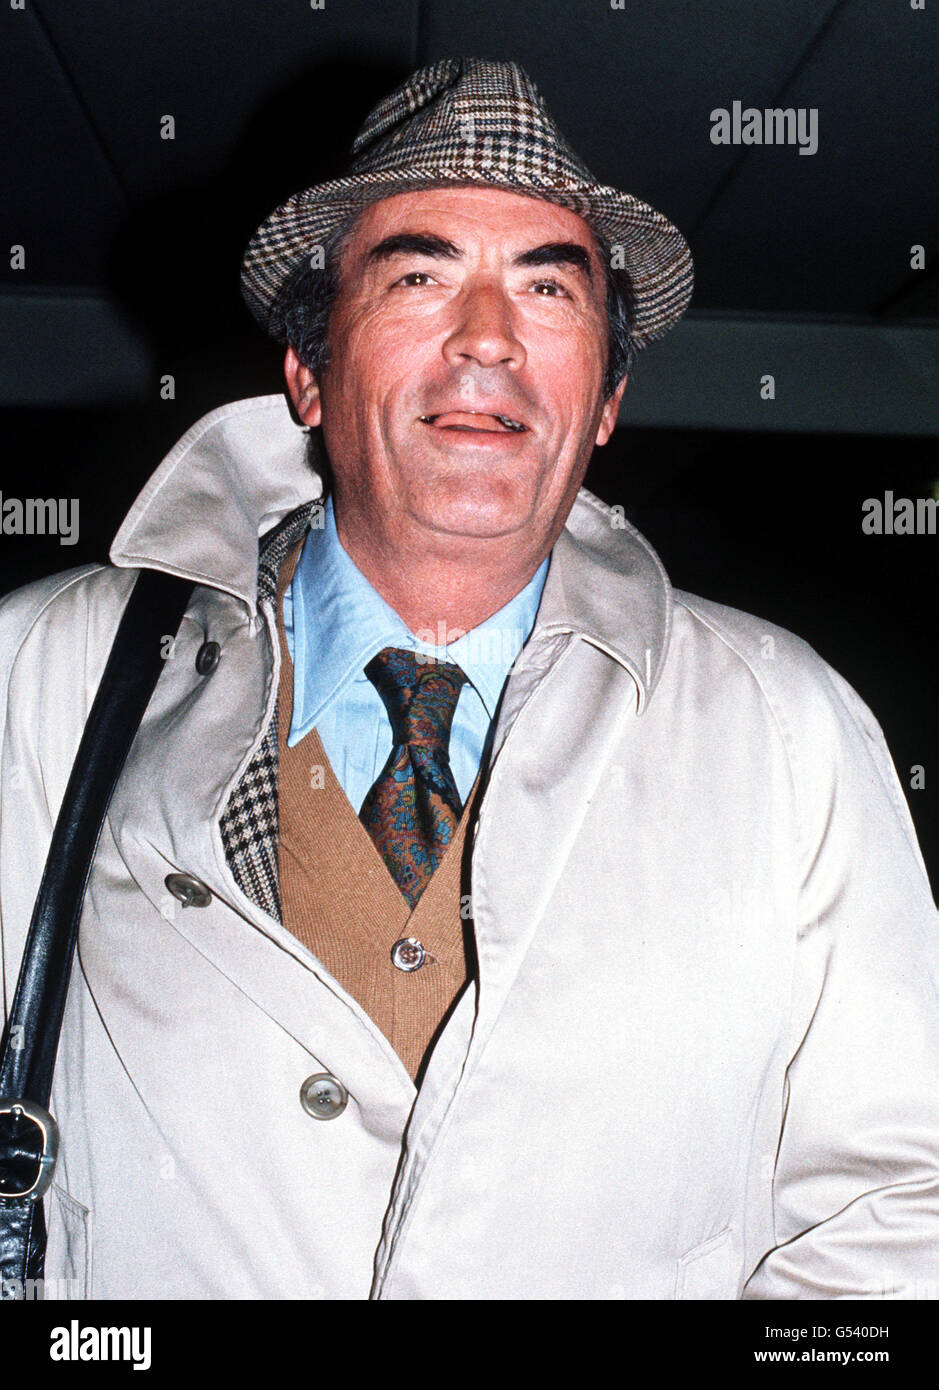 GREGORY PECK 1976: American actor Gregory Peck at Heathrow airport, London, after arriving from Los Angeles to promote his new film 'Omen', a horror story. 12/06/2003: It was announced Thursday June 12, 2003, that Peck, has died aged 87. Stock Photo